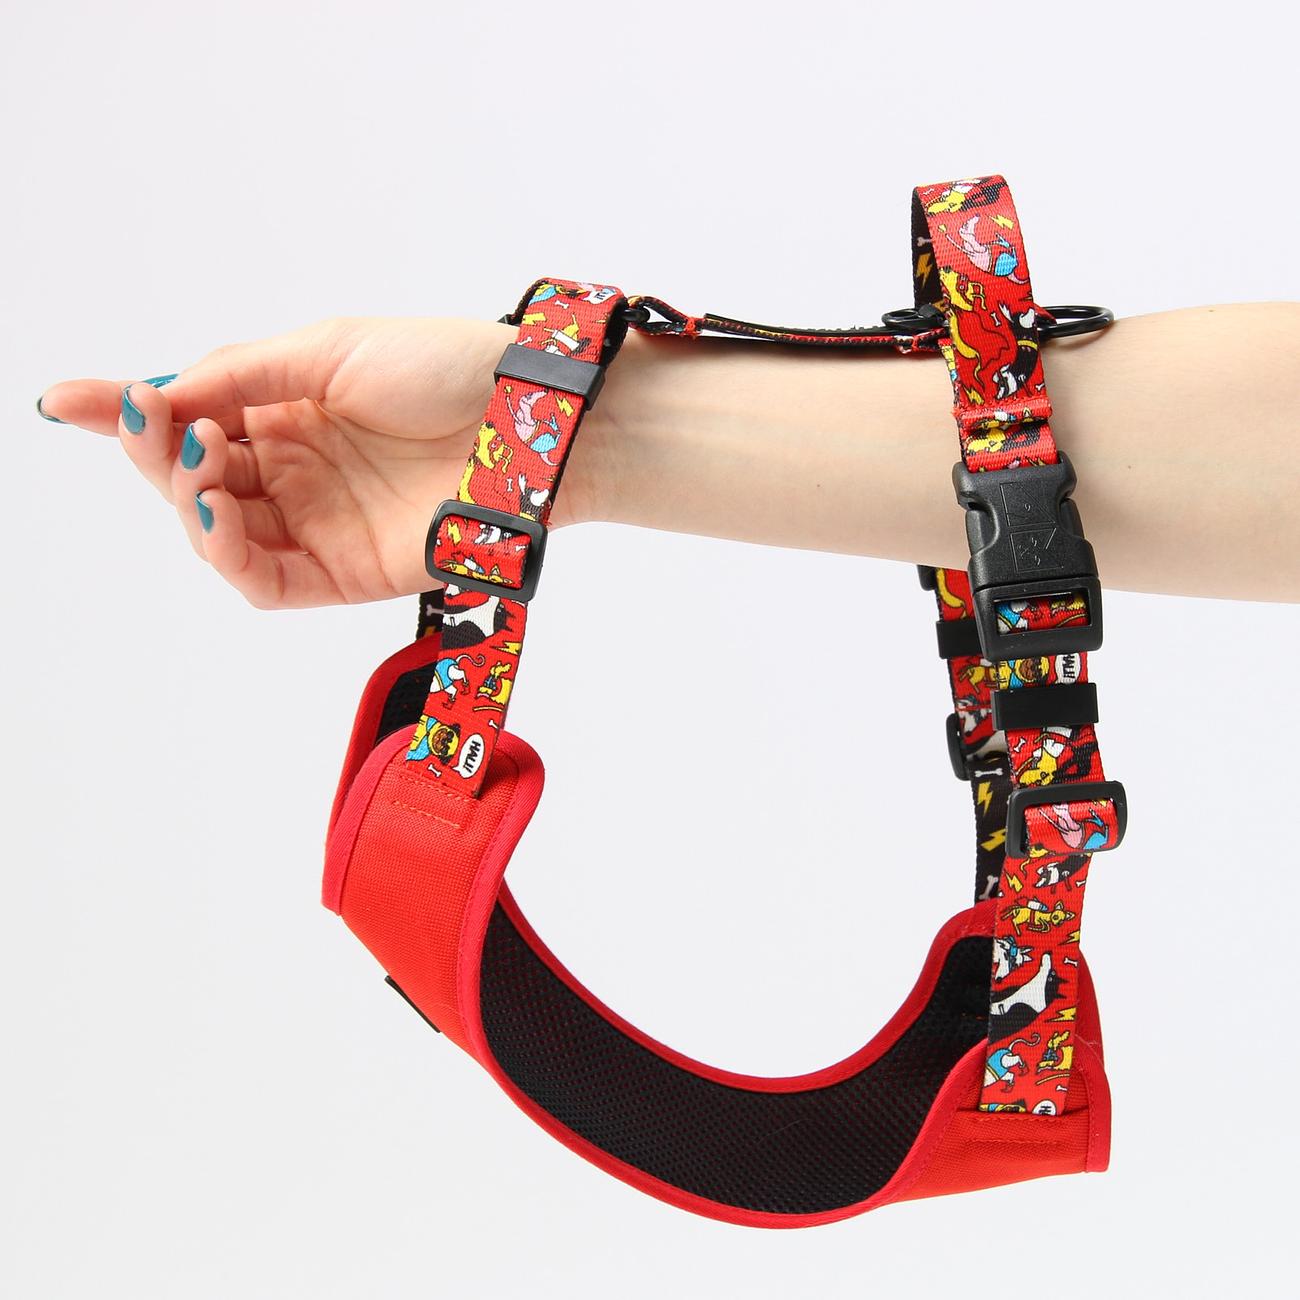 "Woof for the better world" pressure-free harness